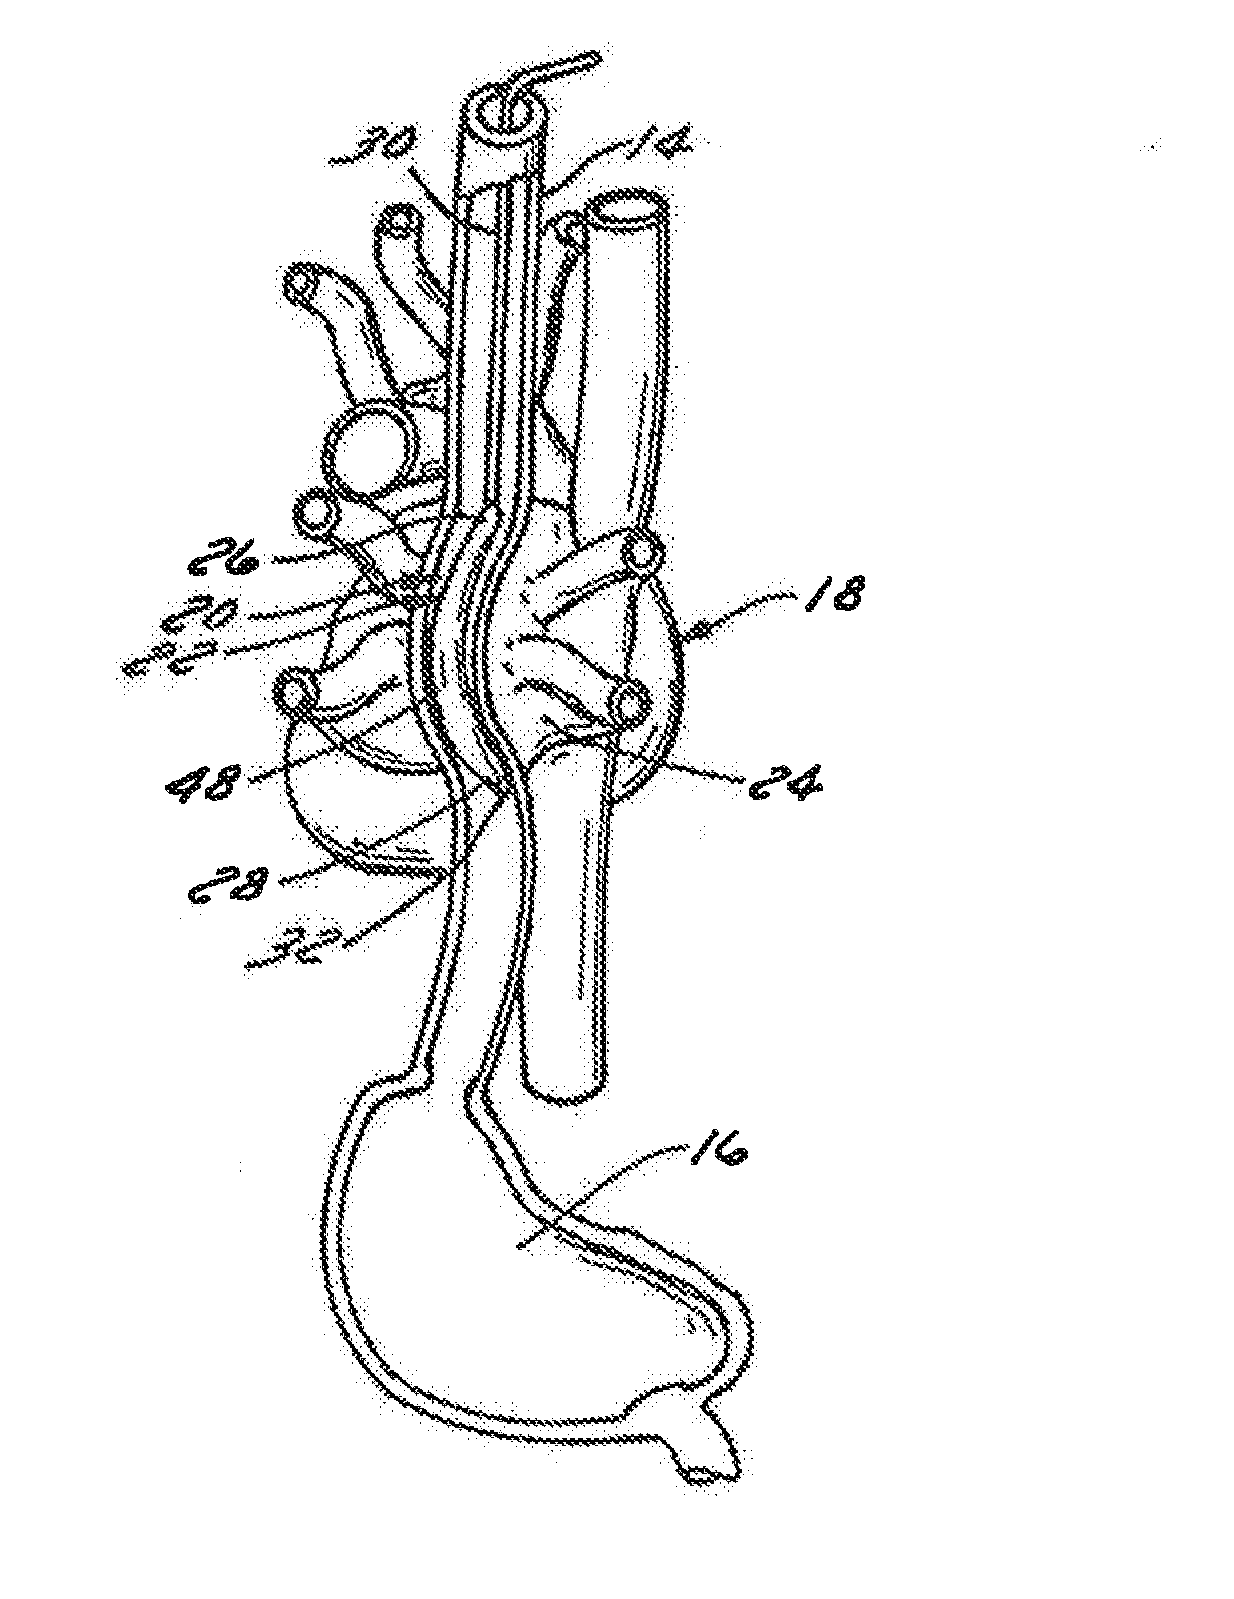 Method of Using an Intra-Esophageal Balloon System